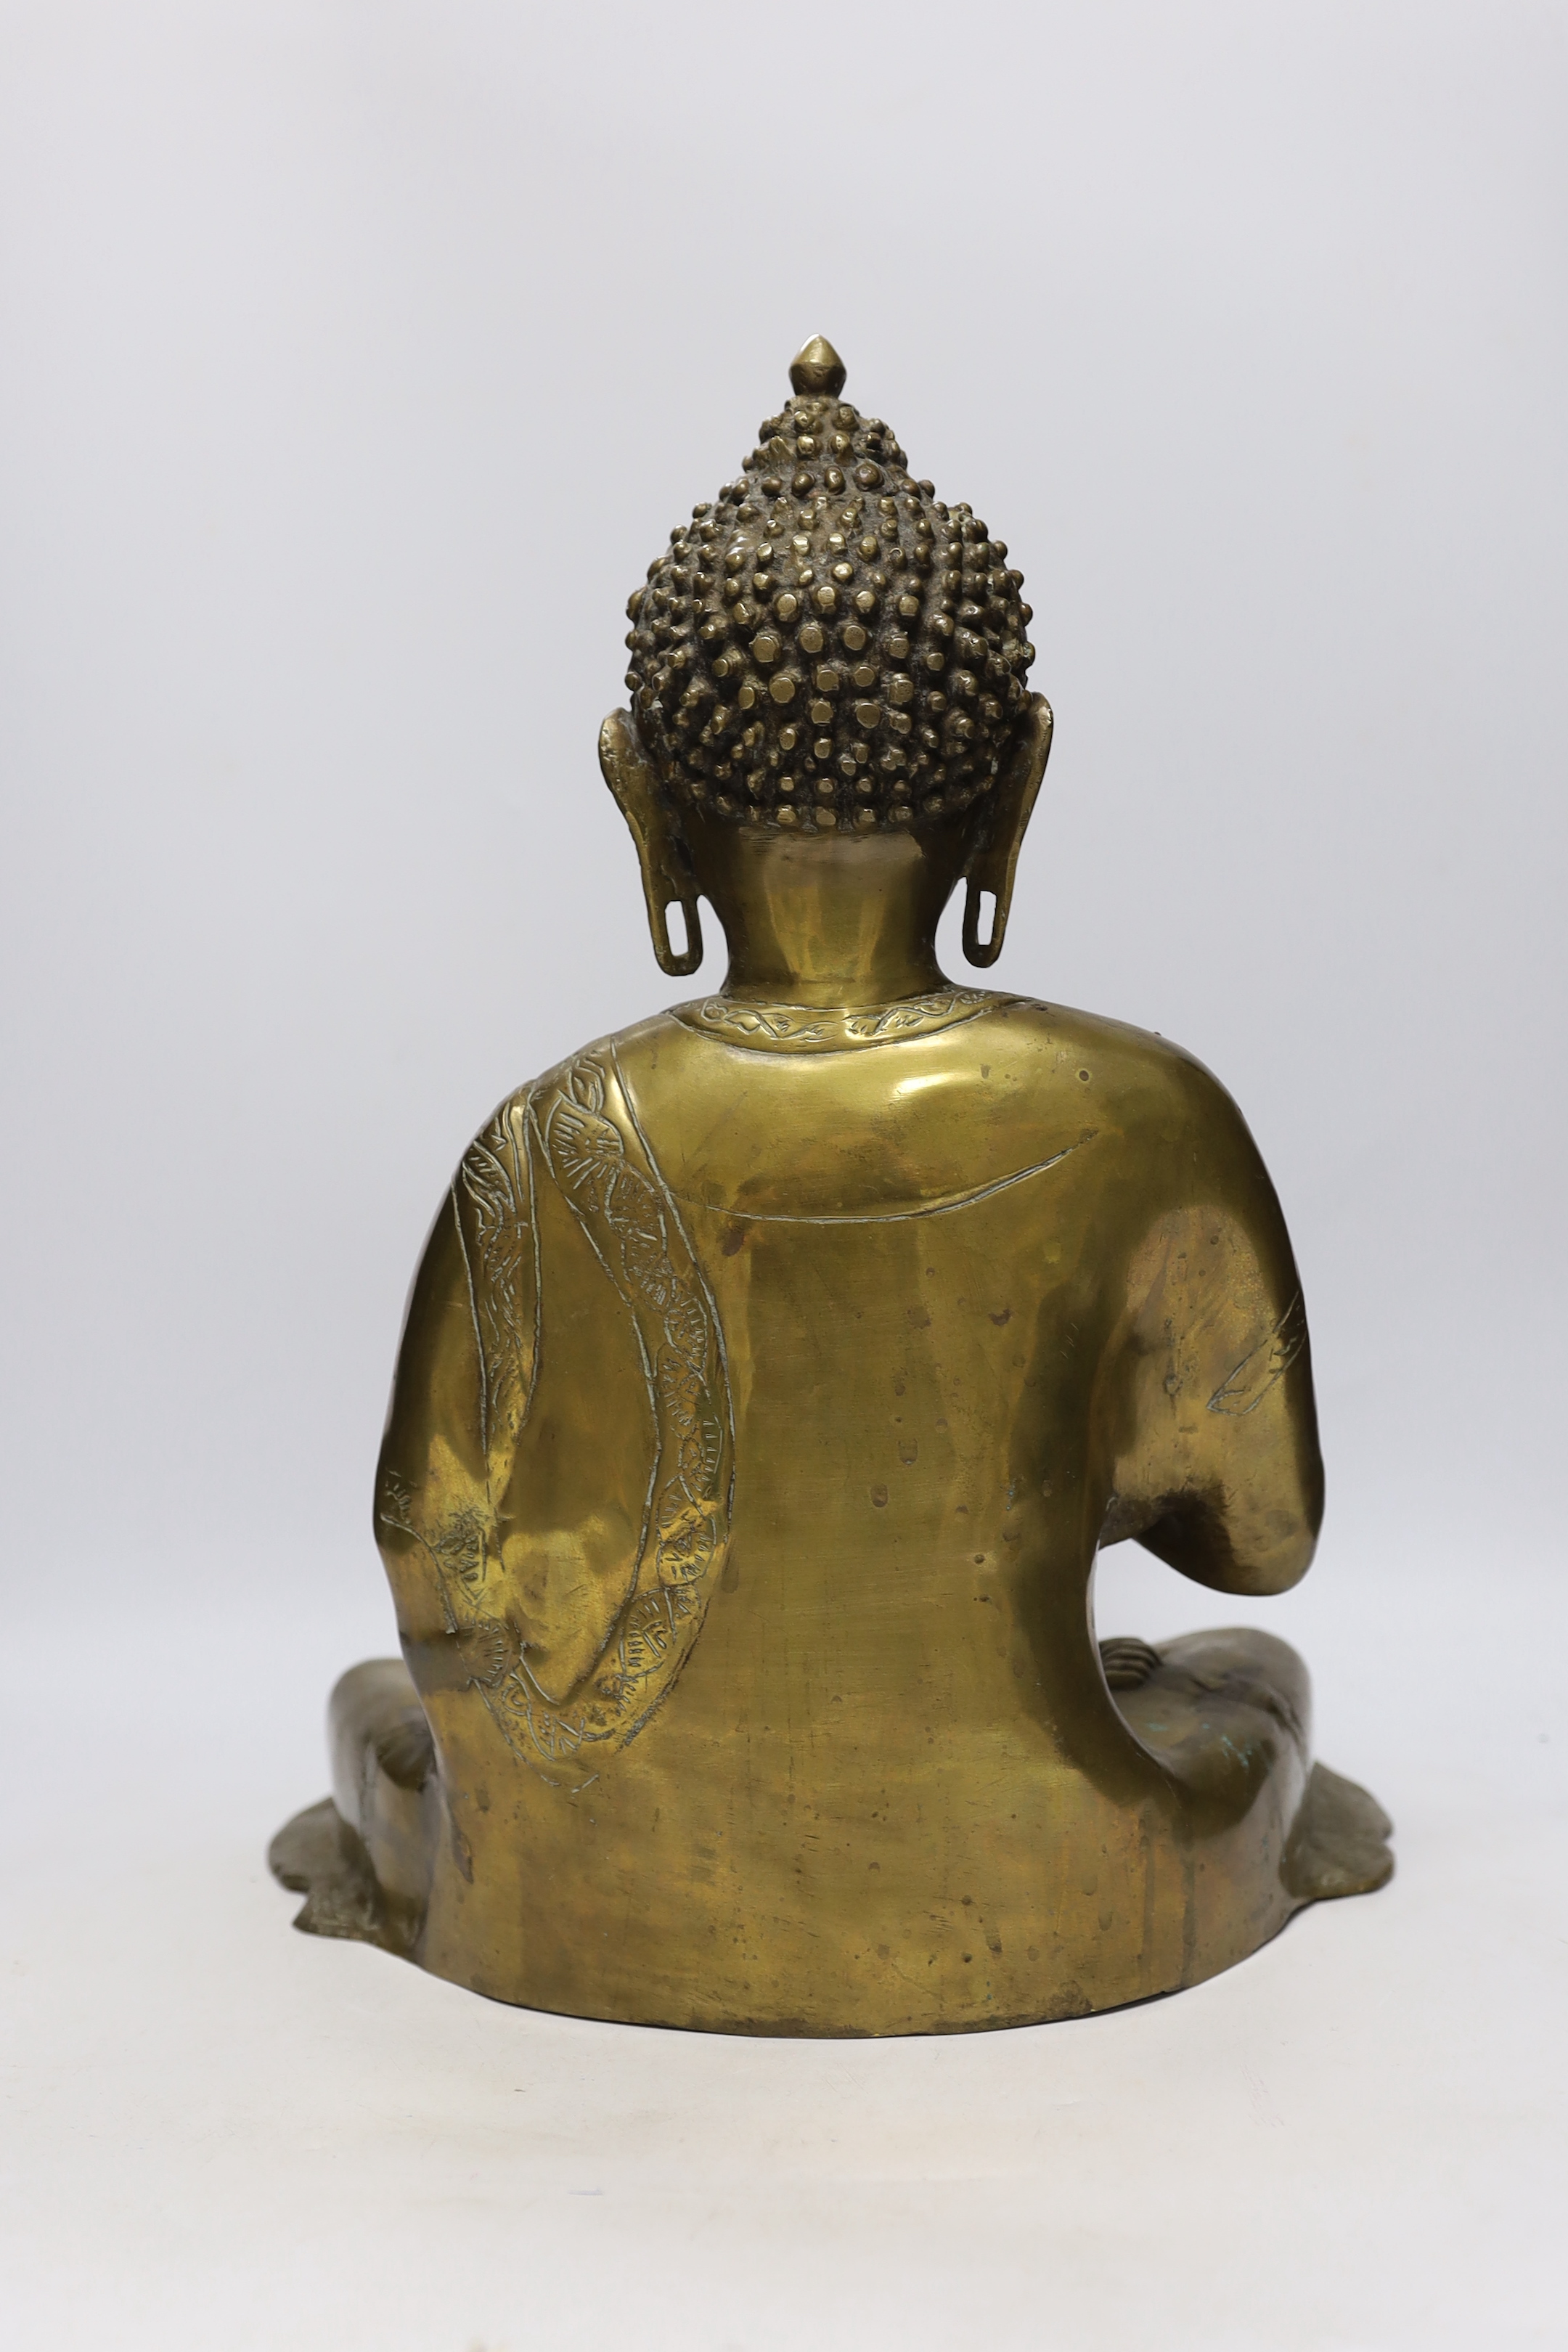 A Chinese or South East Asian bronze figure of seated buddha, 42cm high